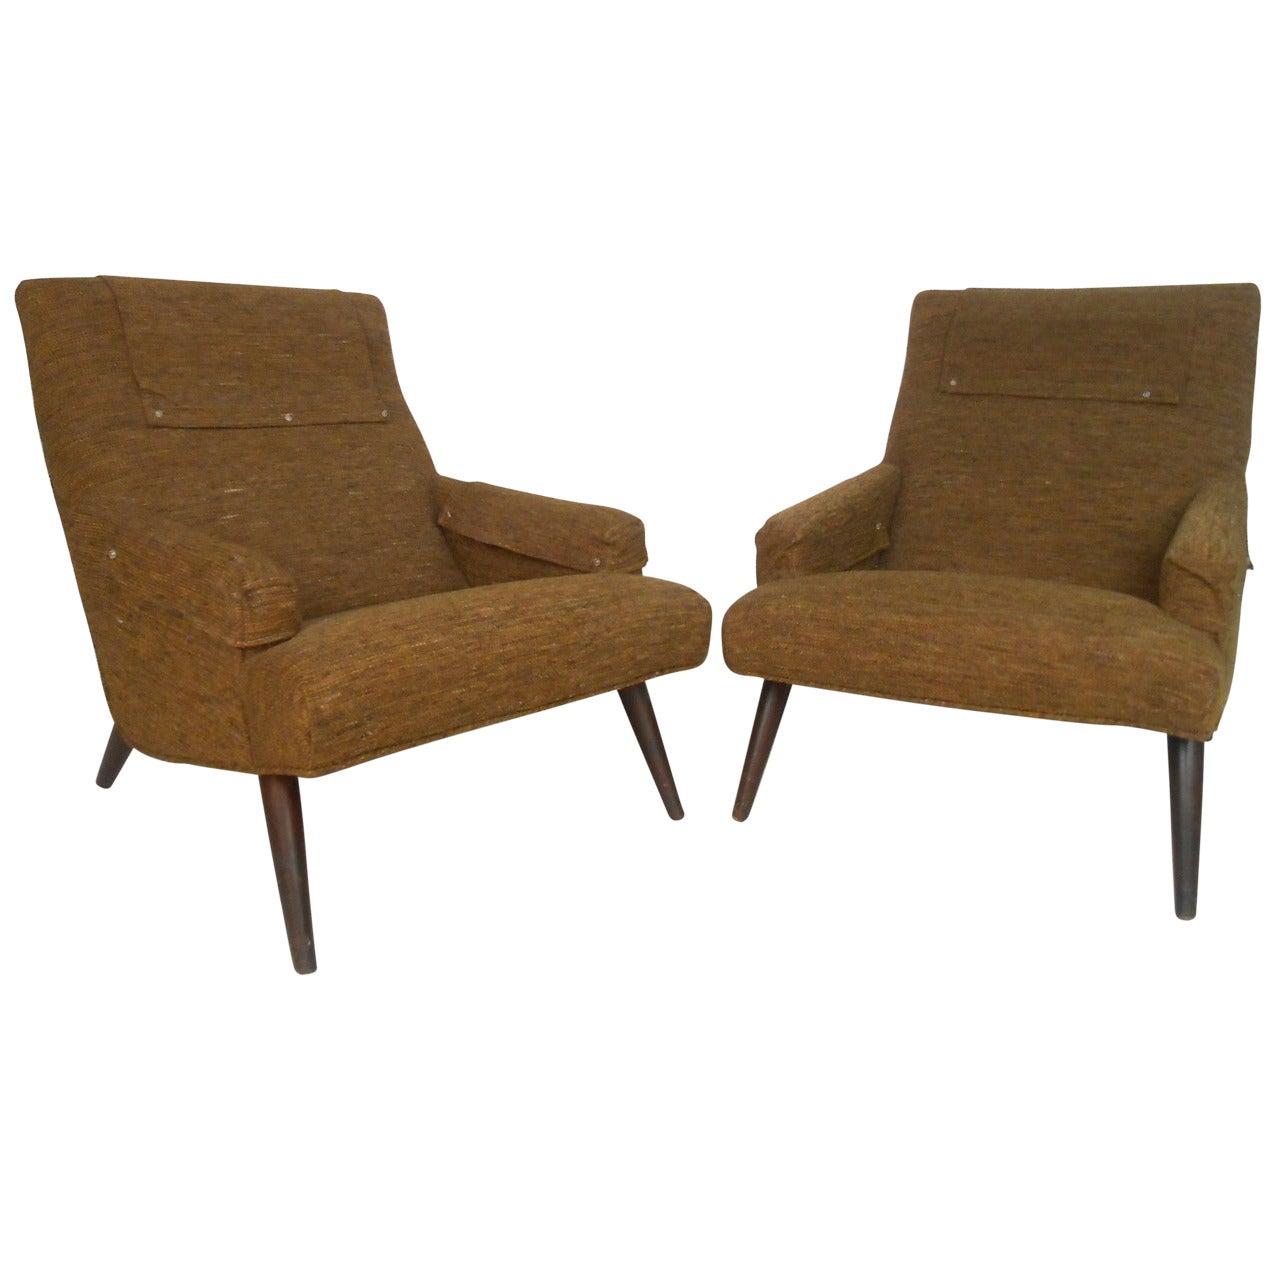 Pair of Unique Mid-Century Modern Lounge Chairs with Ottomans